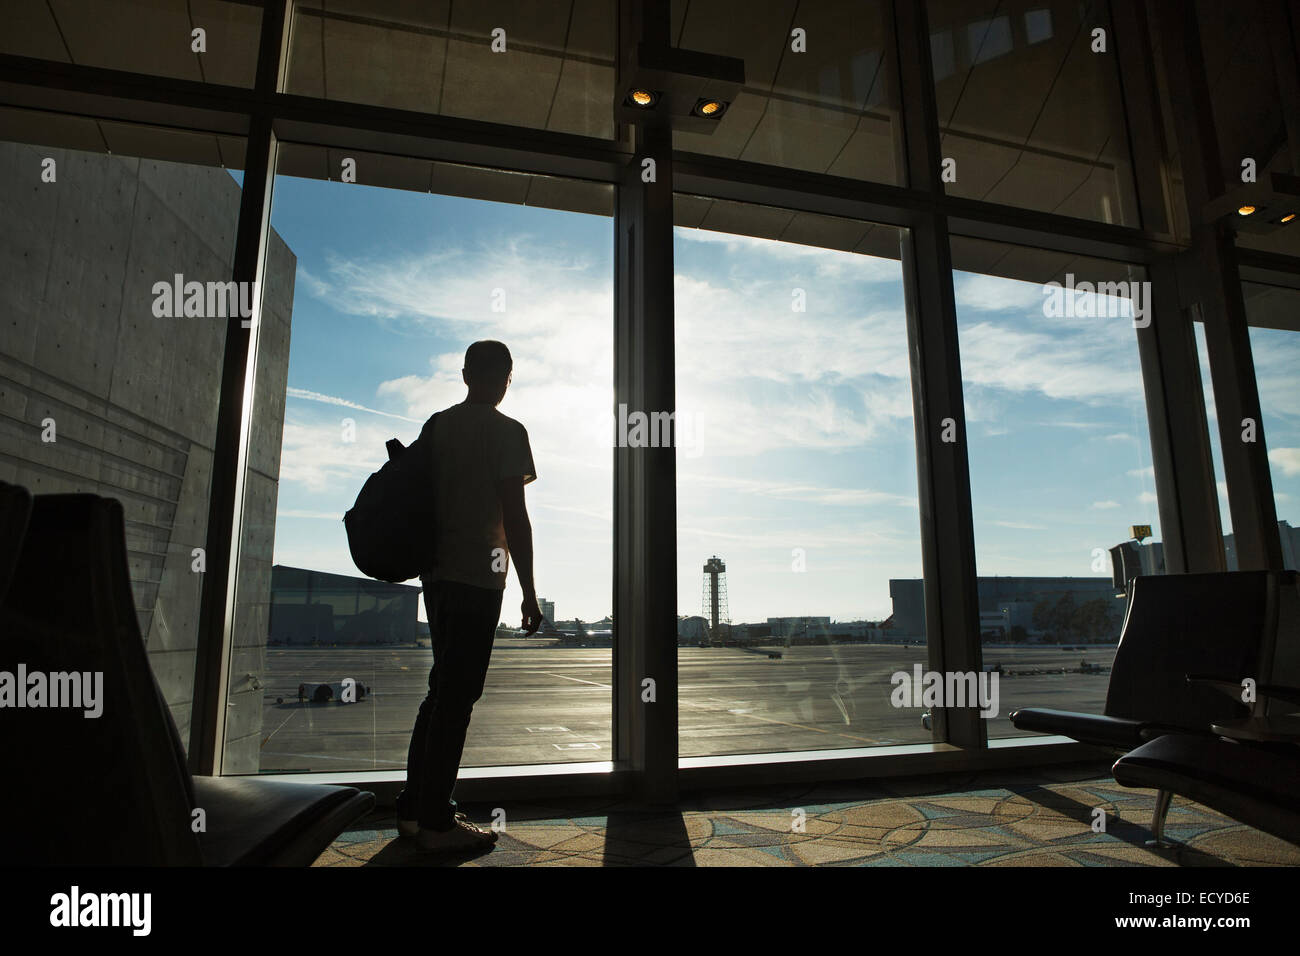 Silhouette of man looking out airport window Stock Photo